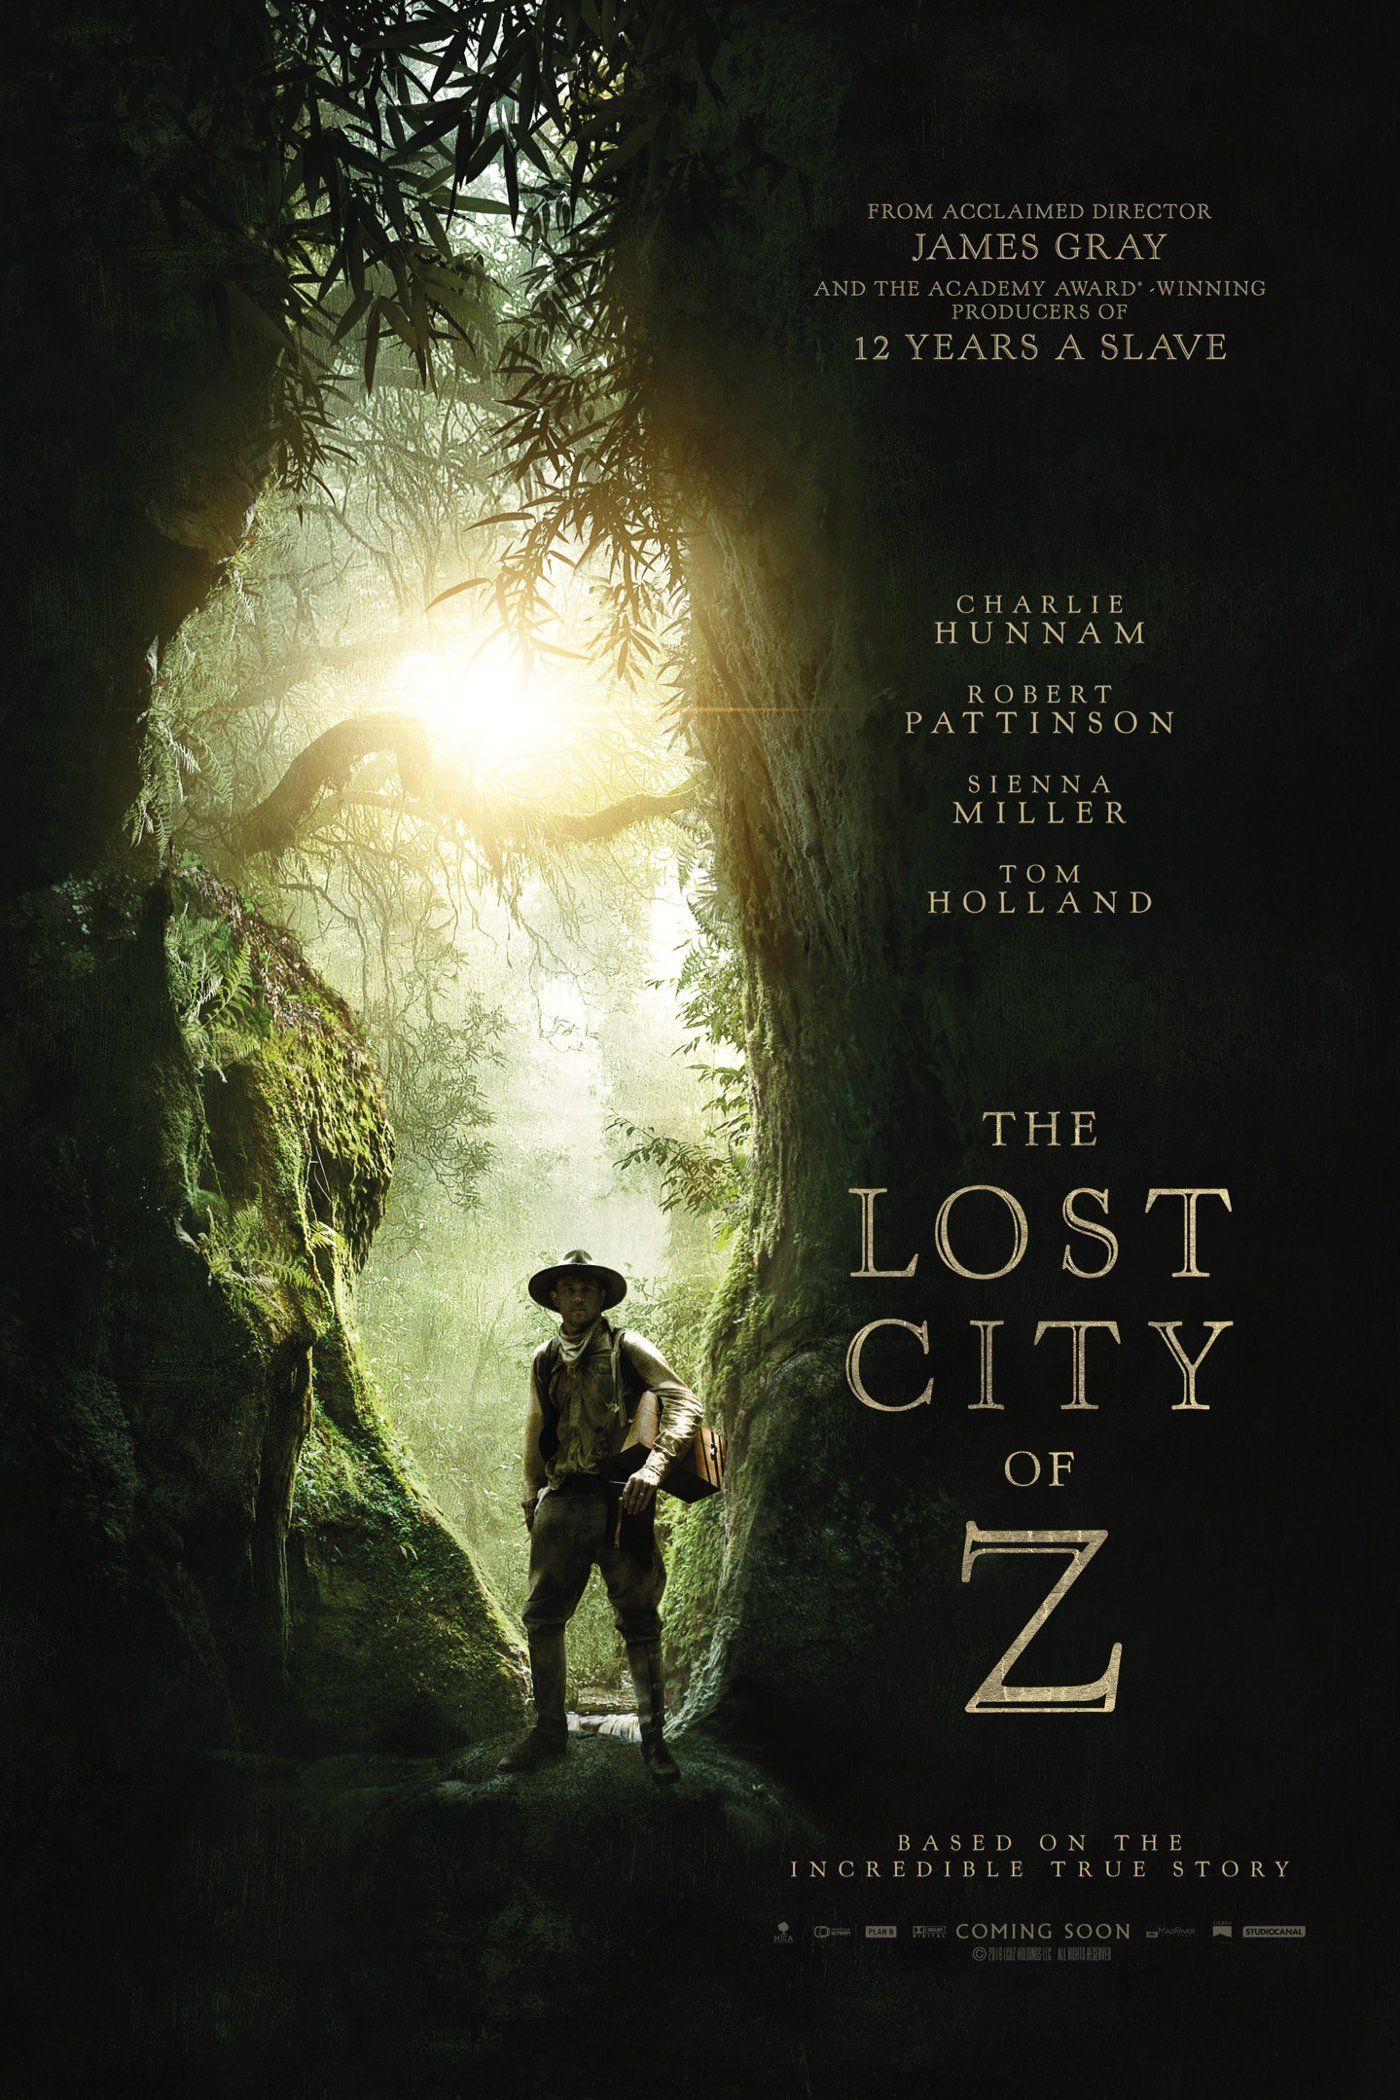 The Lost City of Z - Film (2017) streaming VF gratuit complet